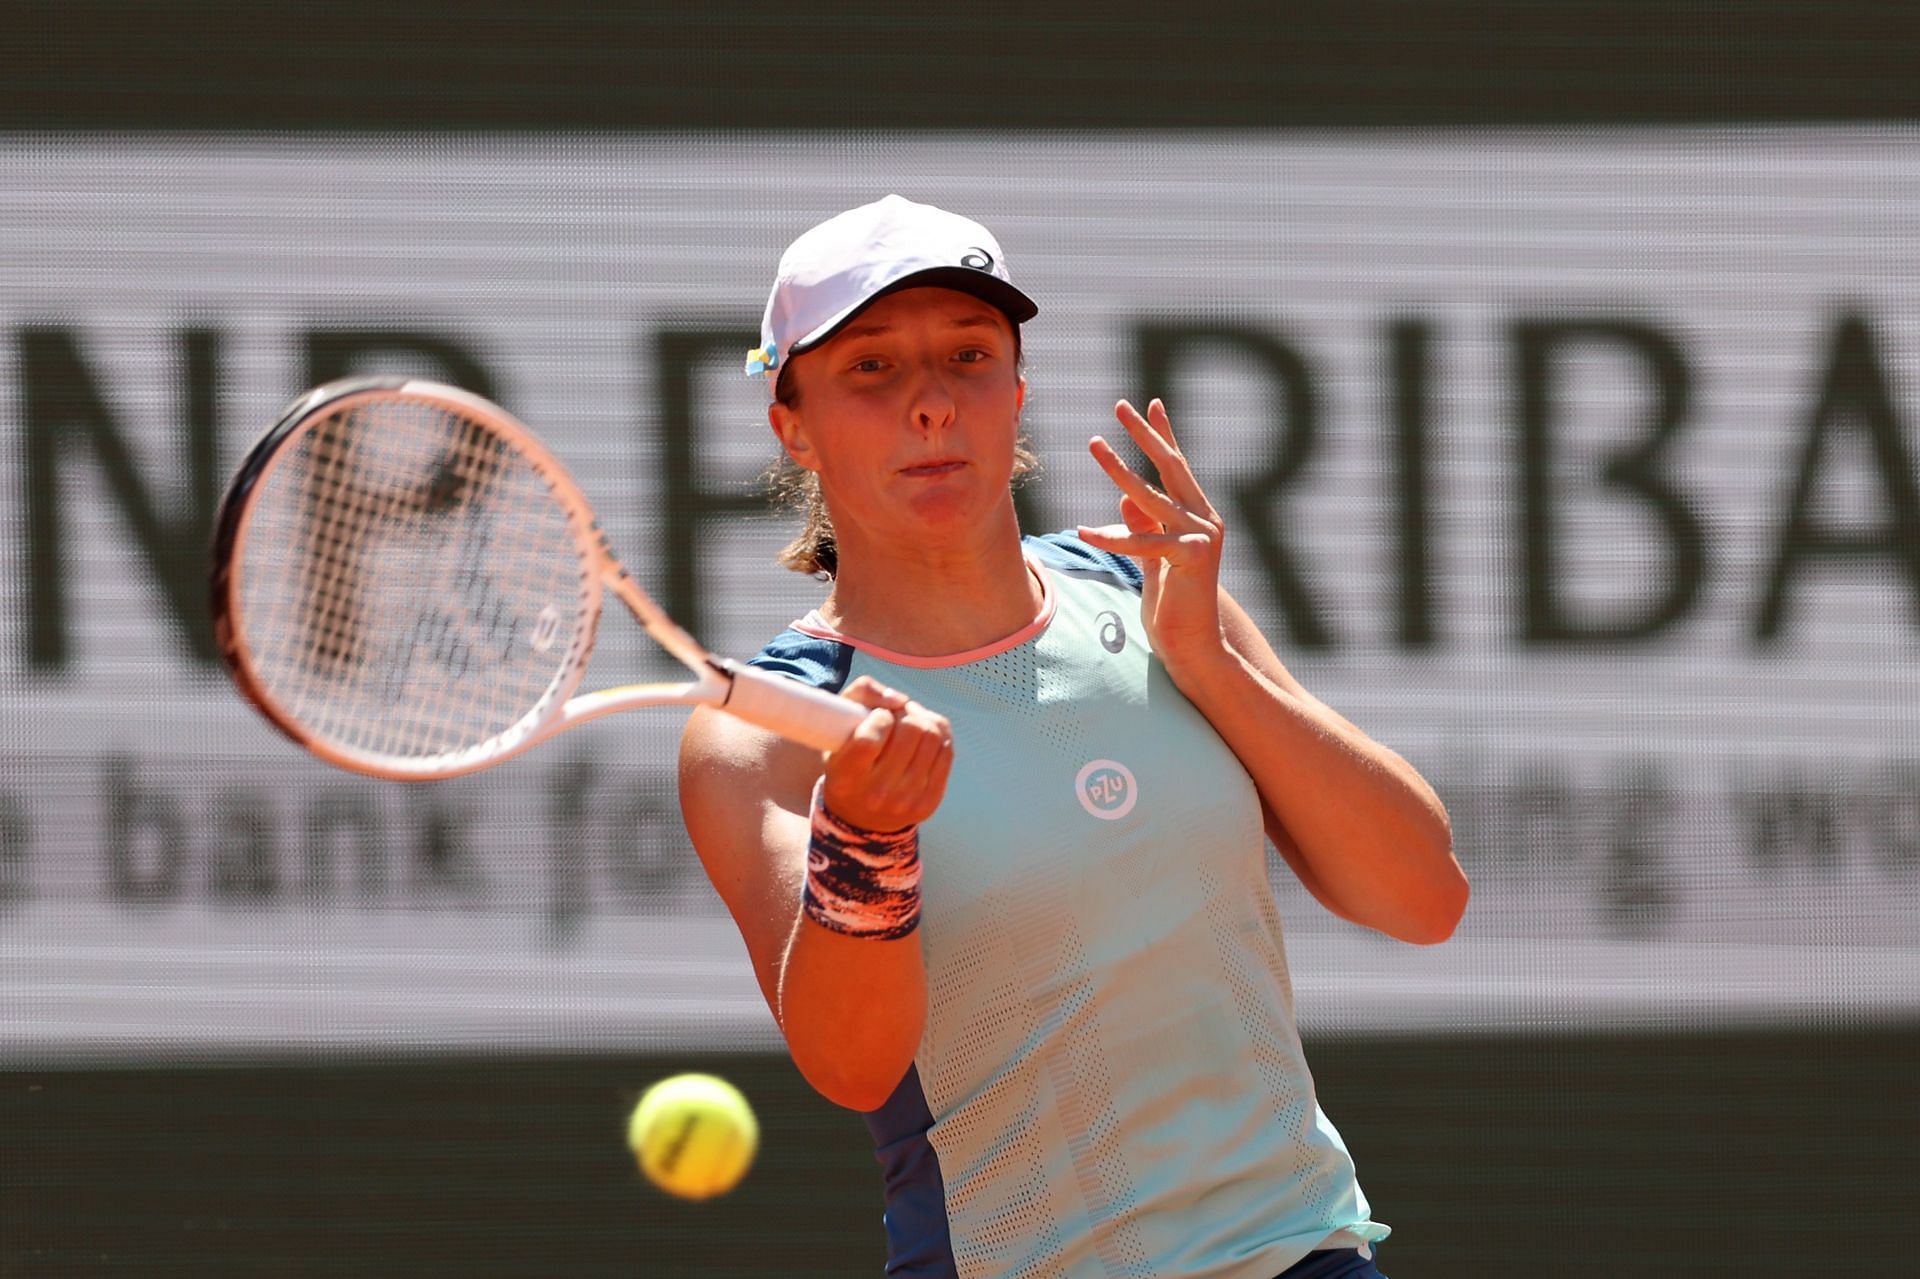 Iga Swiatek in action at the 2022 French Open